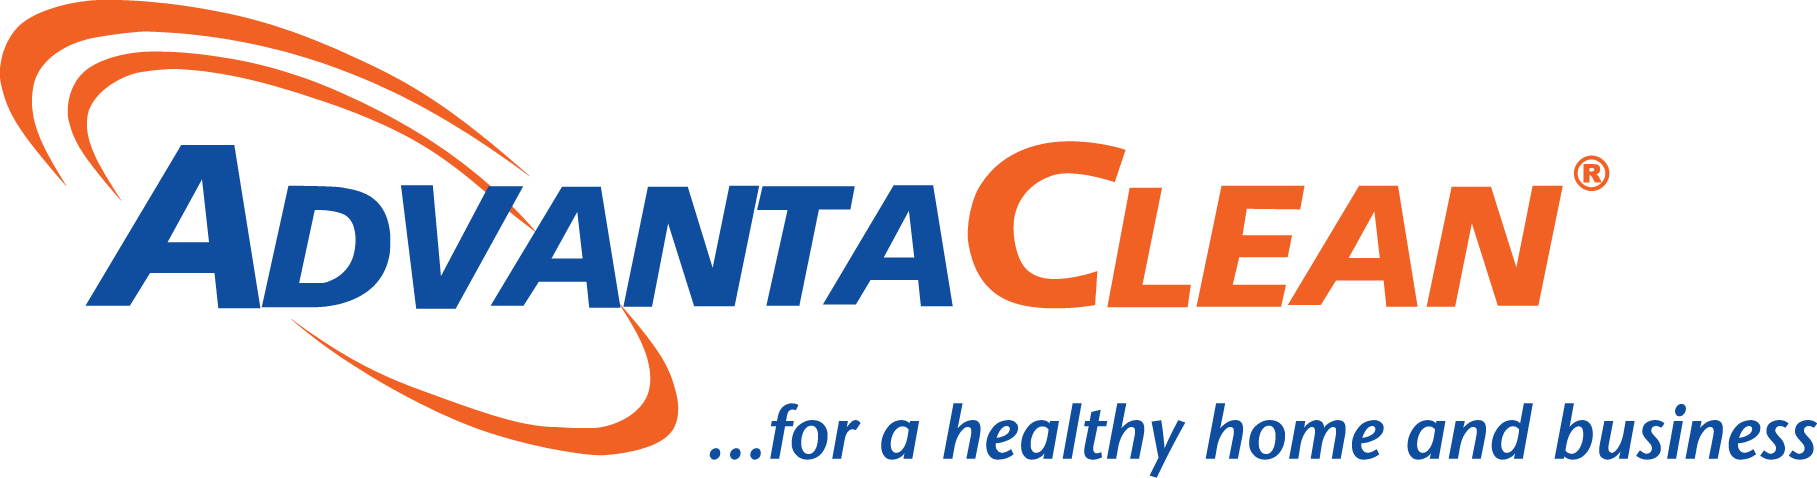 AdvantaClean of Orlando, Winter Haven and Clermont Logo